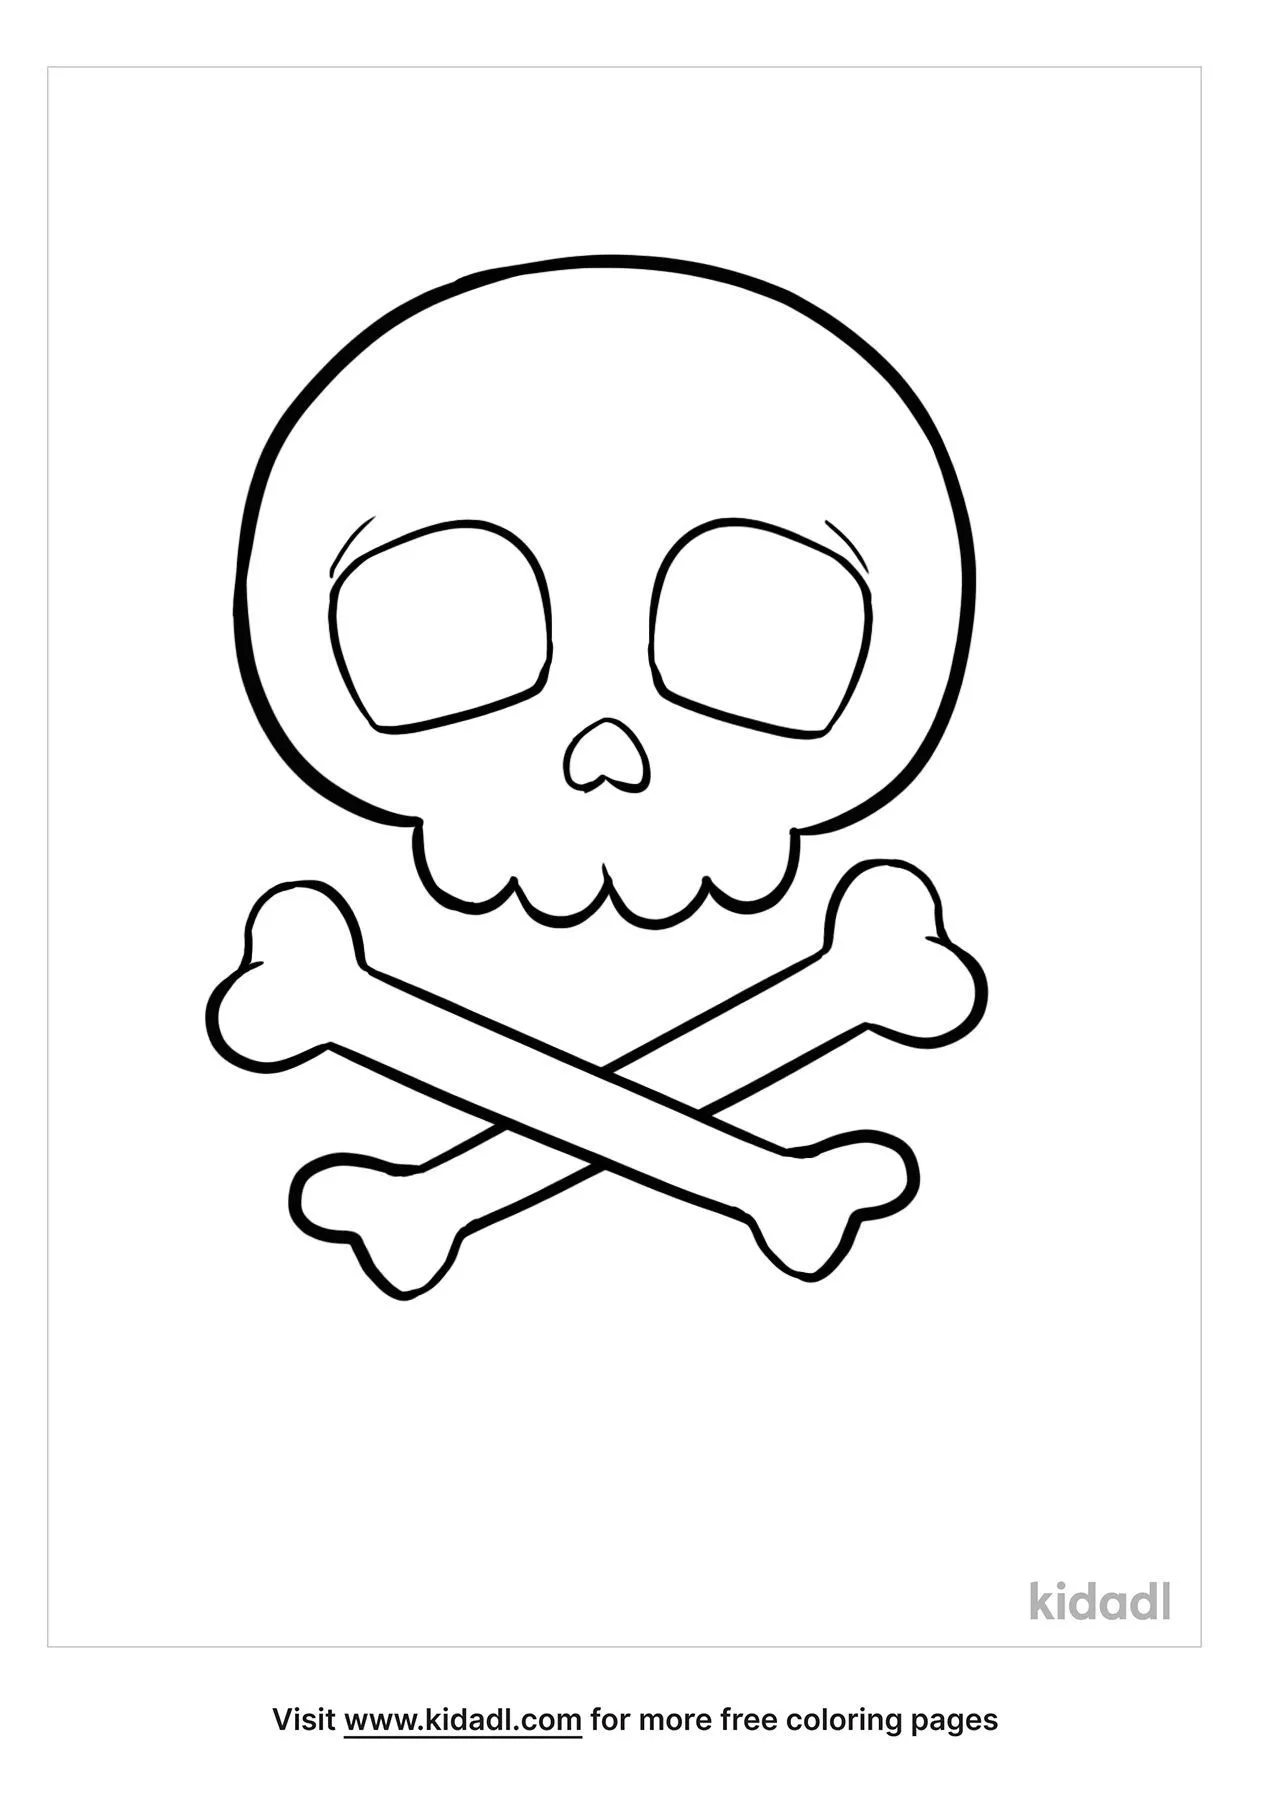 Free skull and crossbones coloring page coloring page printables